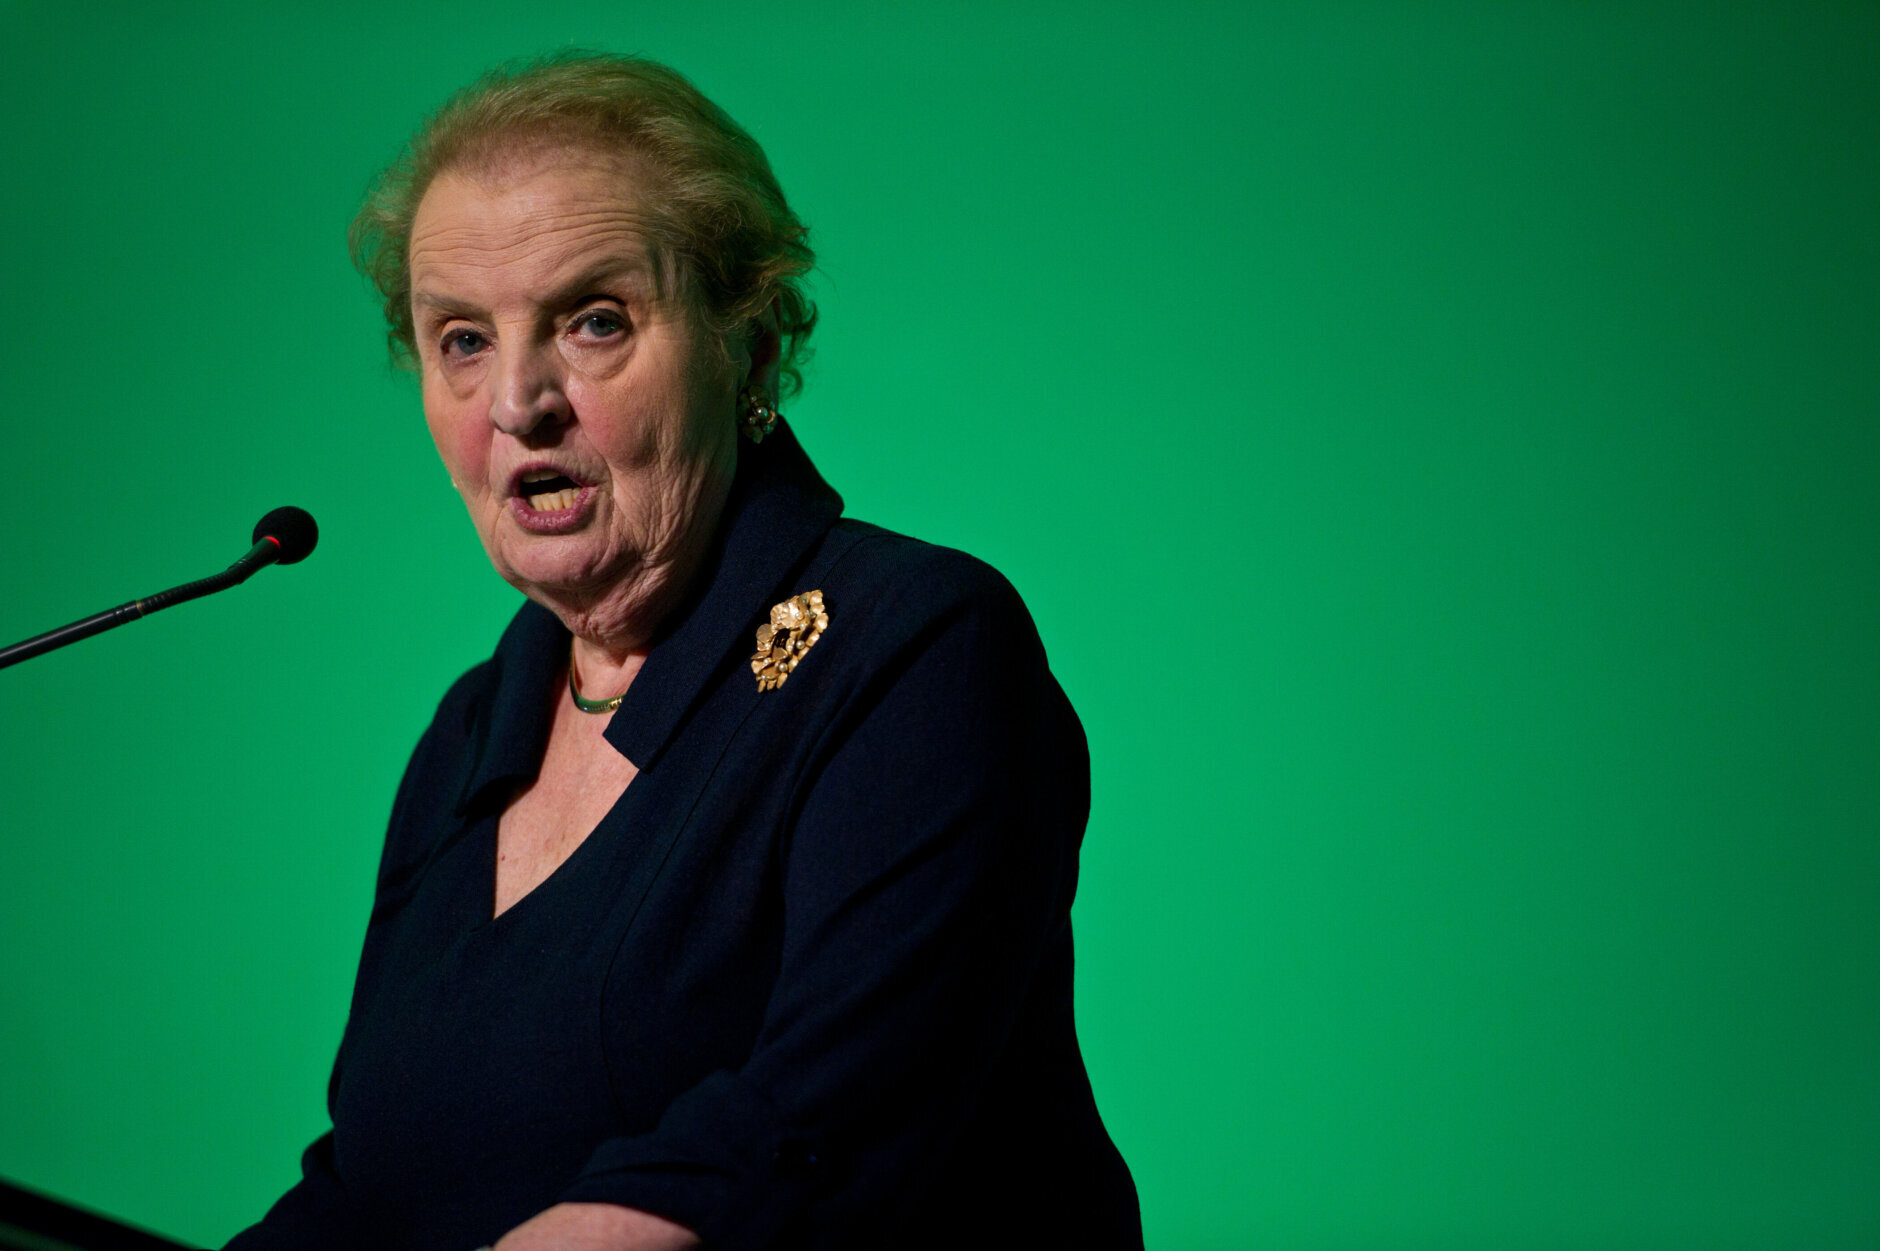 Photos Madeleine Albright 1st Female Us Secretary Of State Through The Years Wtop News